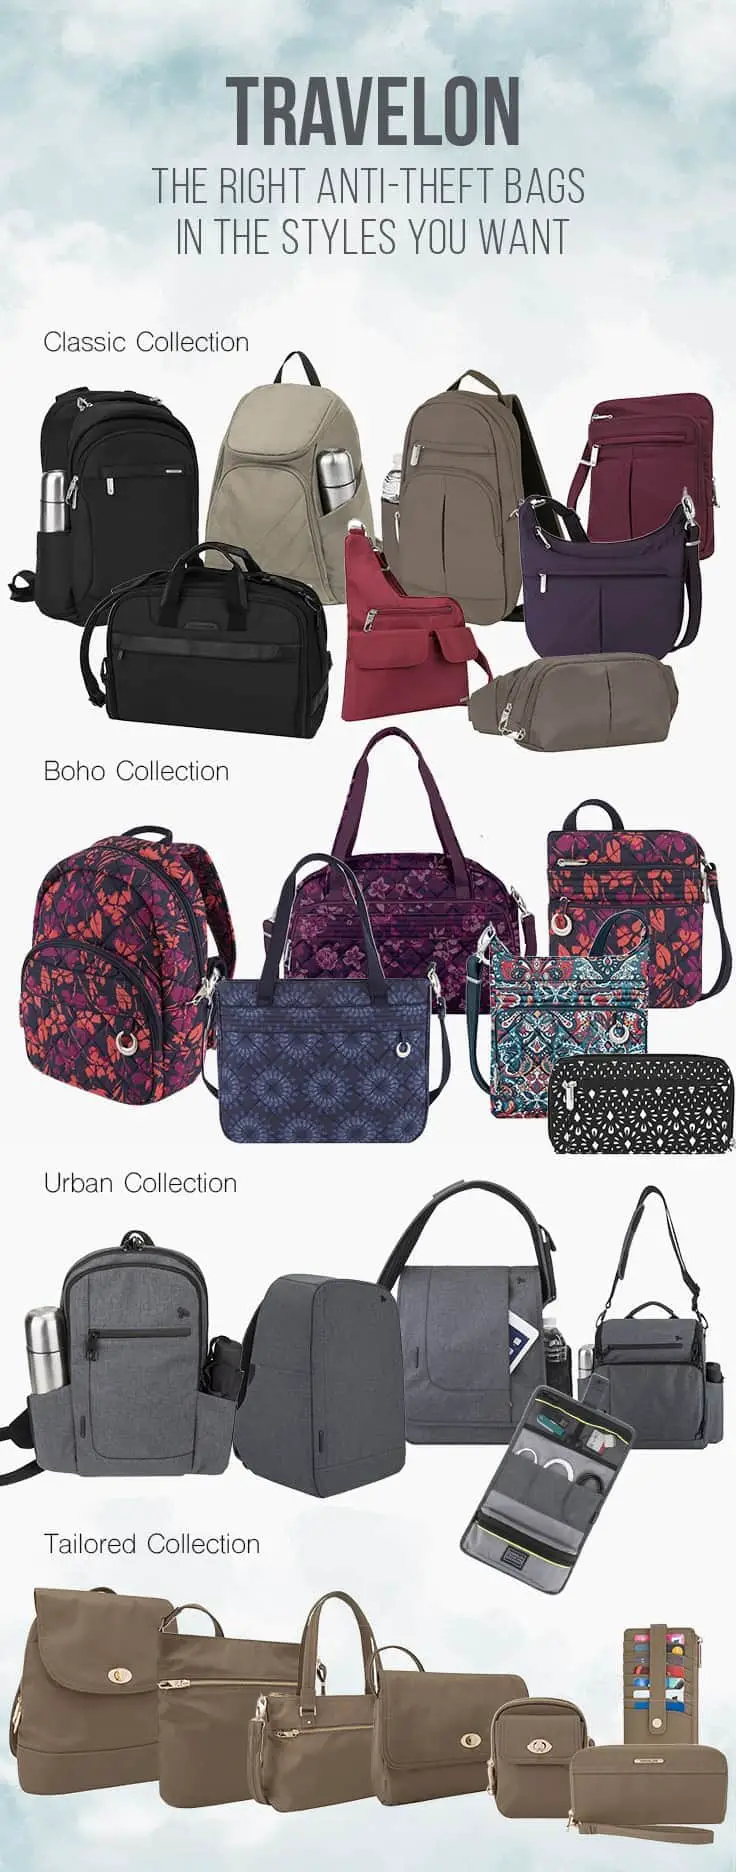 For travel safety and style Travelon anti-theft bags have it all. They feature styles for both men and women in a variety of bags from business cases, carry-on, totes, shoulder bags and clutches. Check out the current 2018 styles. | fashion | bags | travel gear | handbags | luggage | anti-theft | travel safety |